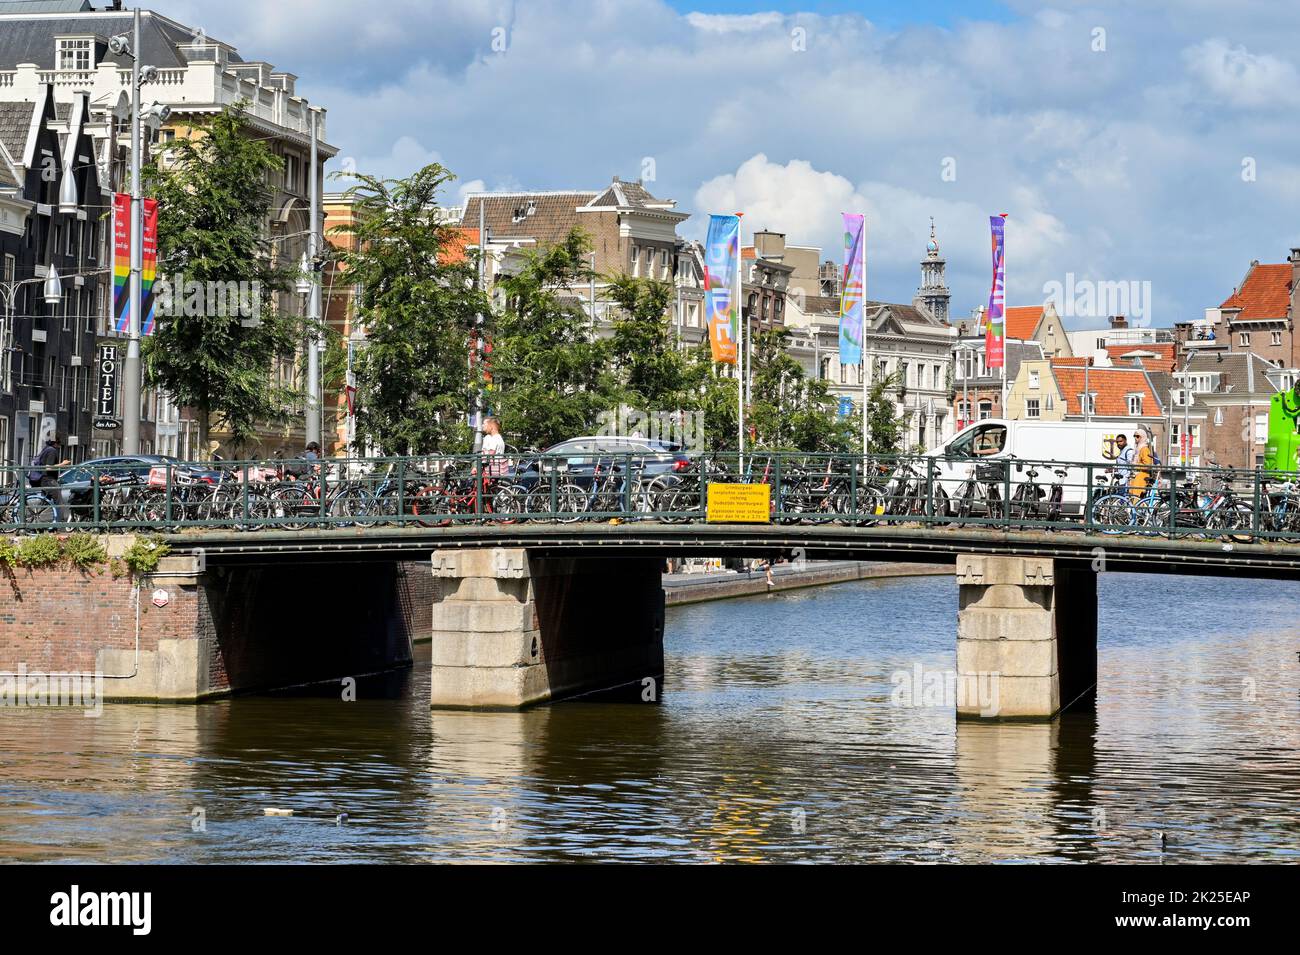 Amsterdam, Netherlands - August 2022: Bridge over one of the city's canals with bicycles parked by commuters Stock Photo